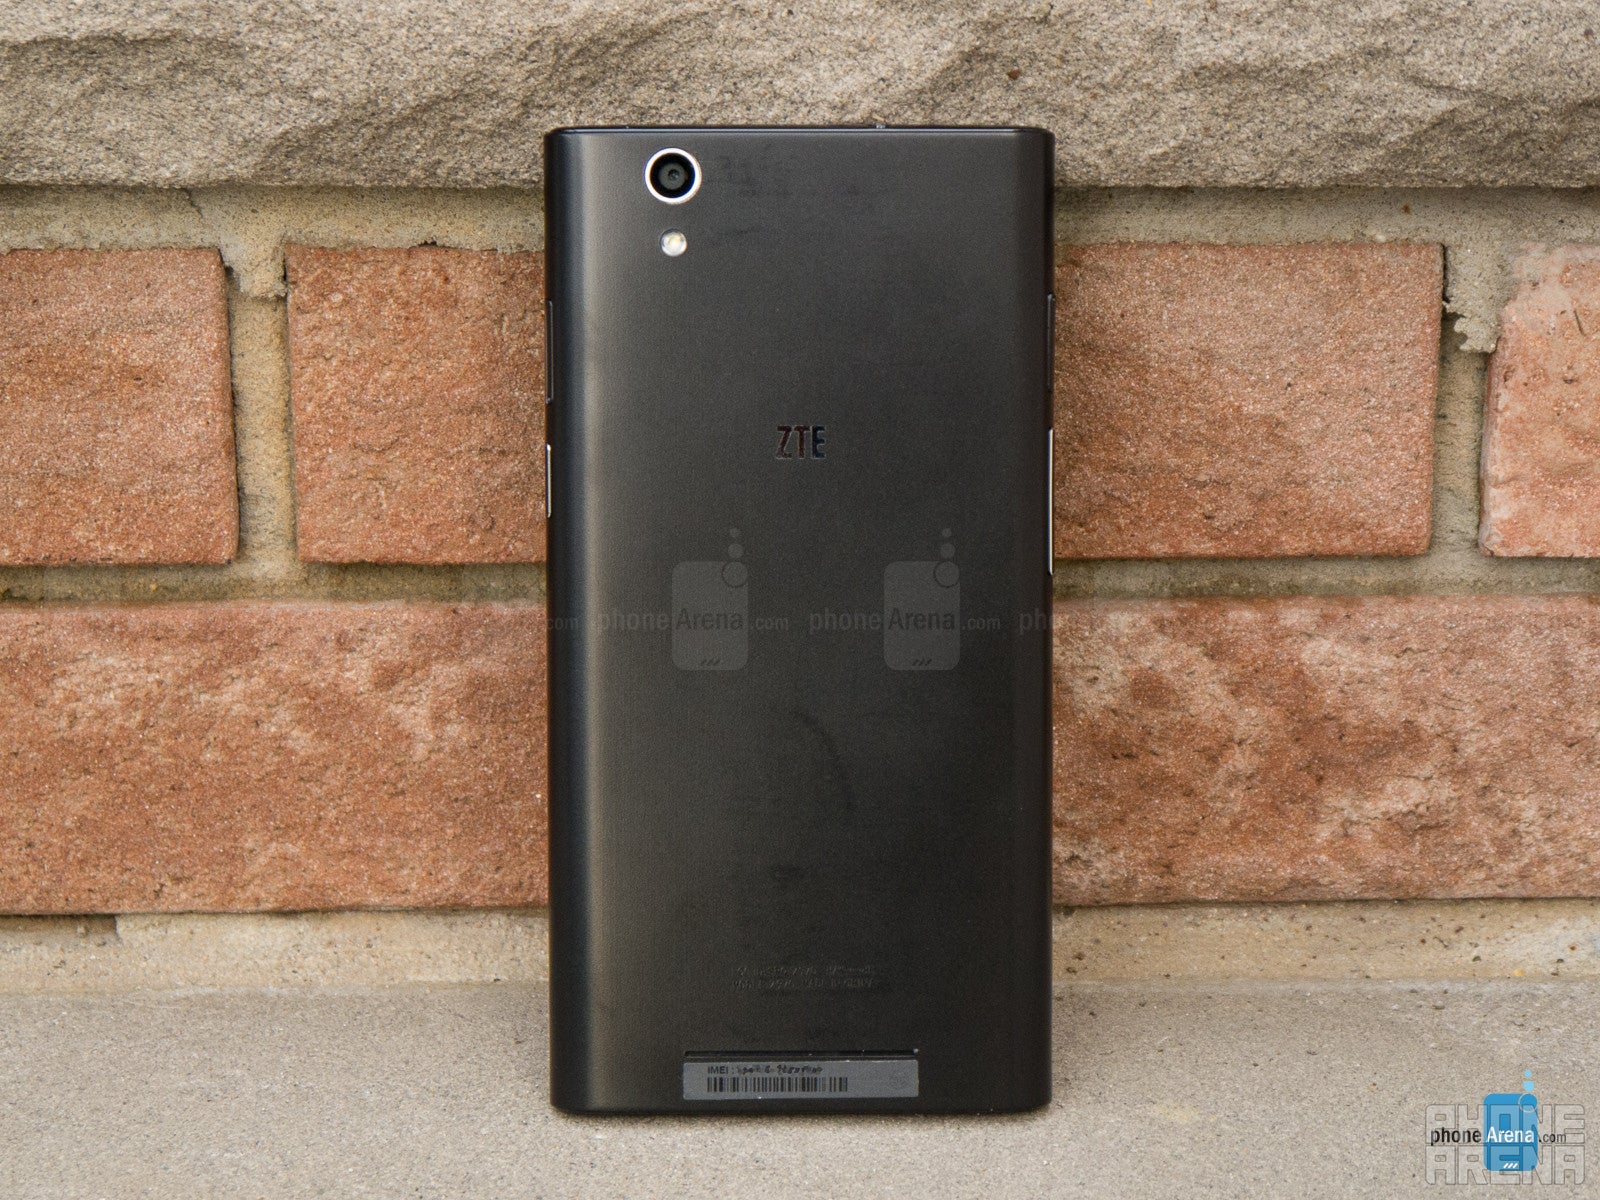 ZTE ZMAX Review